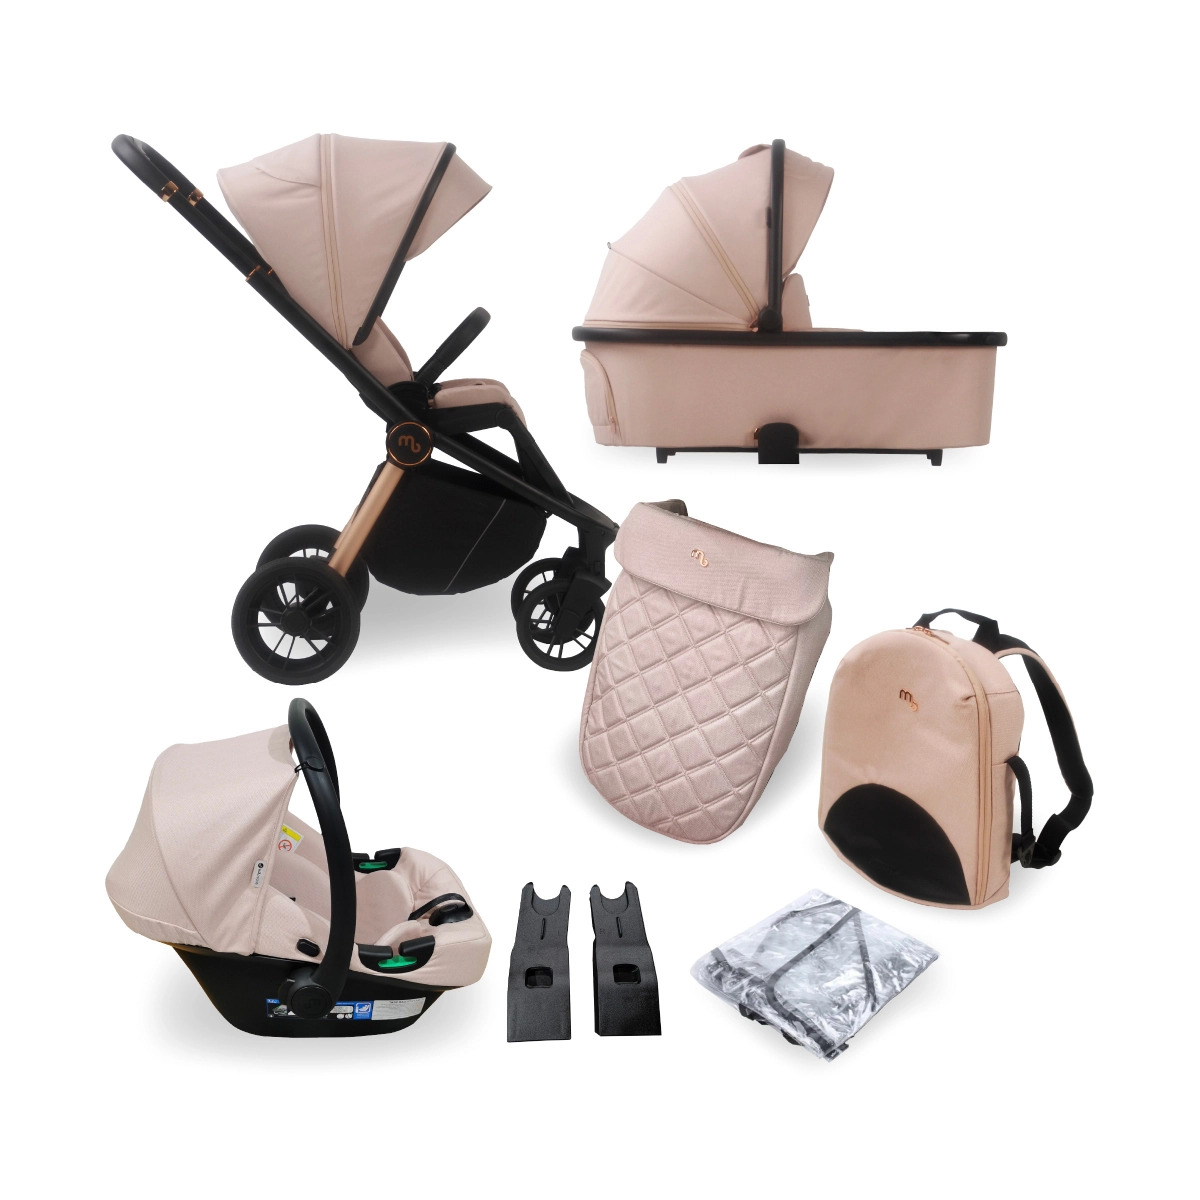 My Babiie MB450i Billie Faiers 3 in 1 Travel System